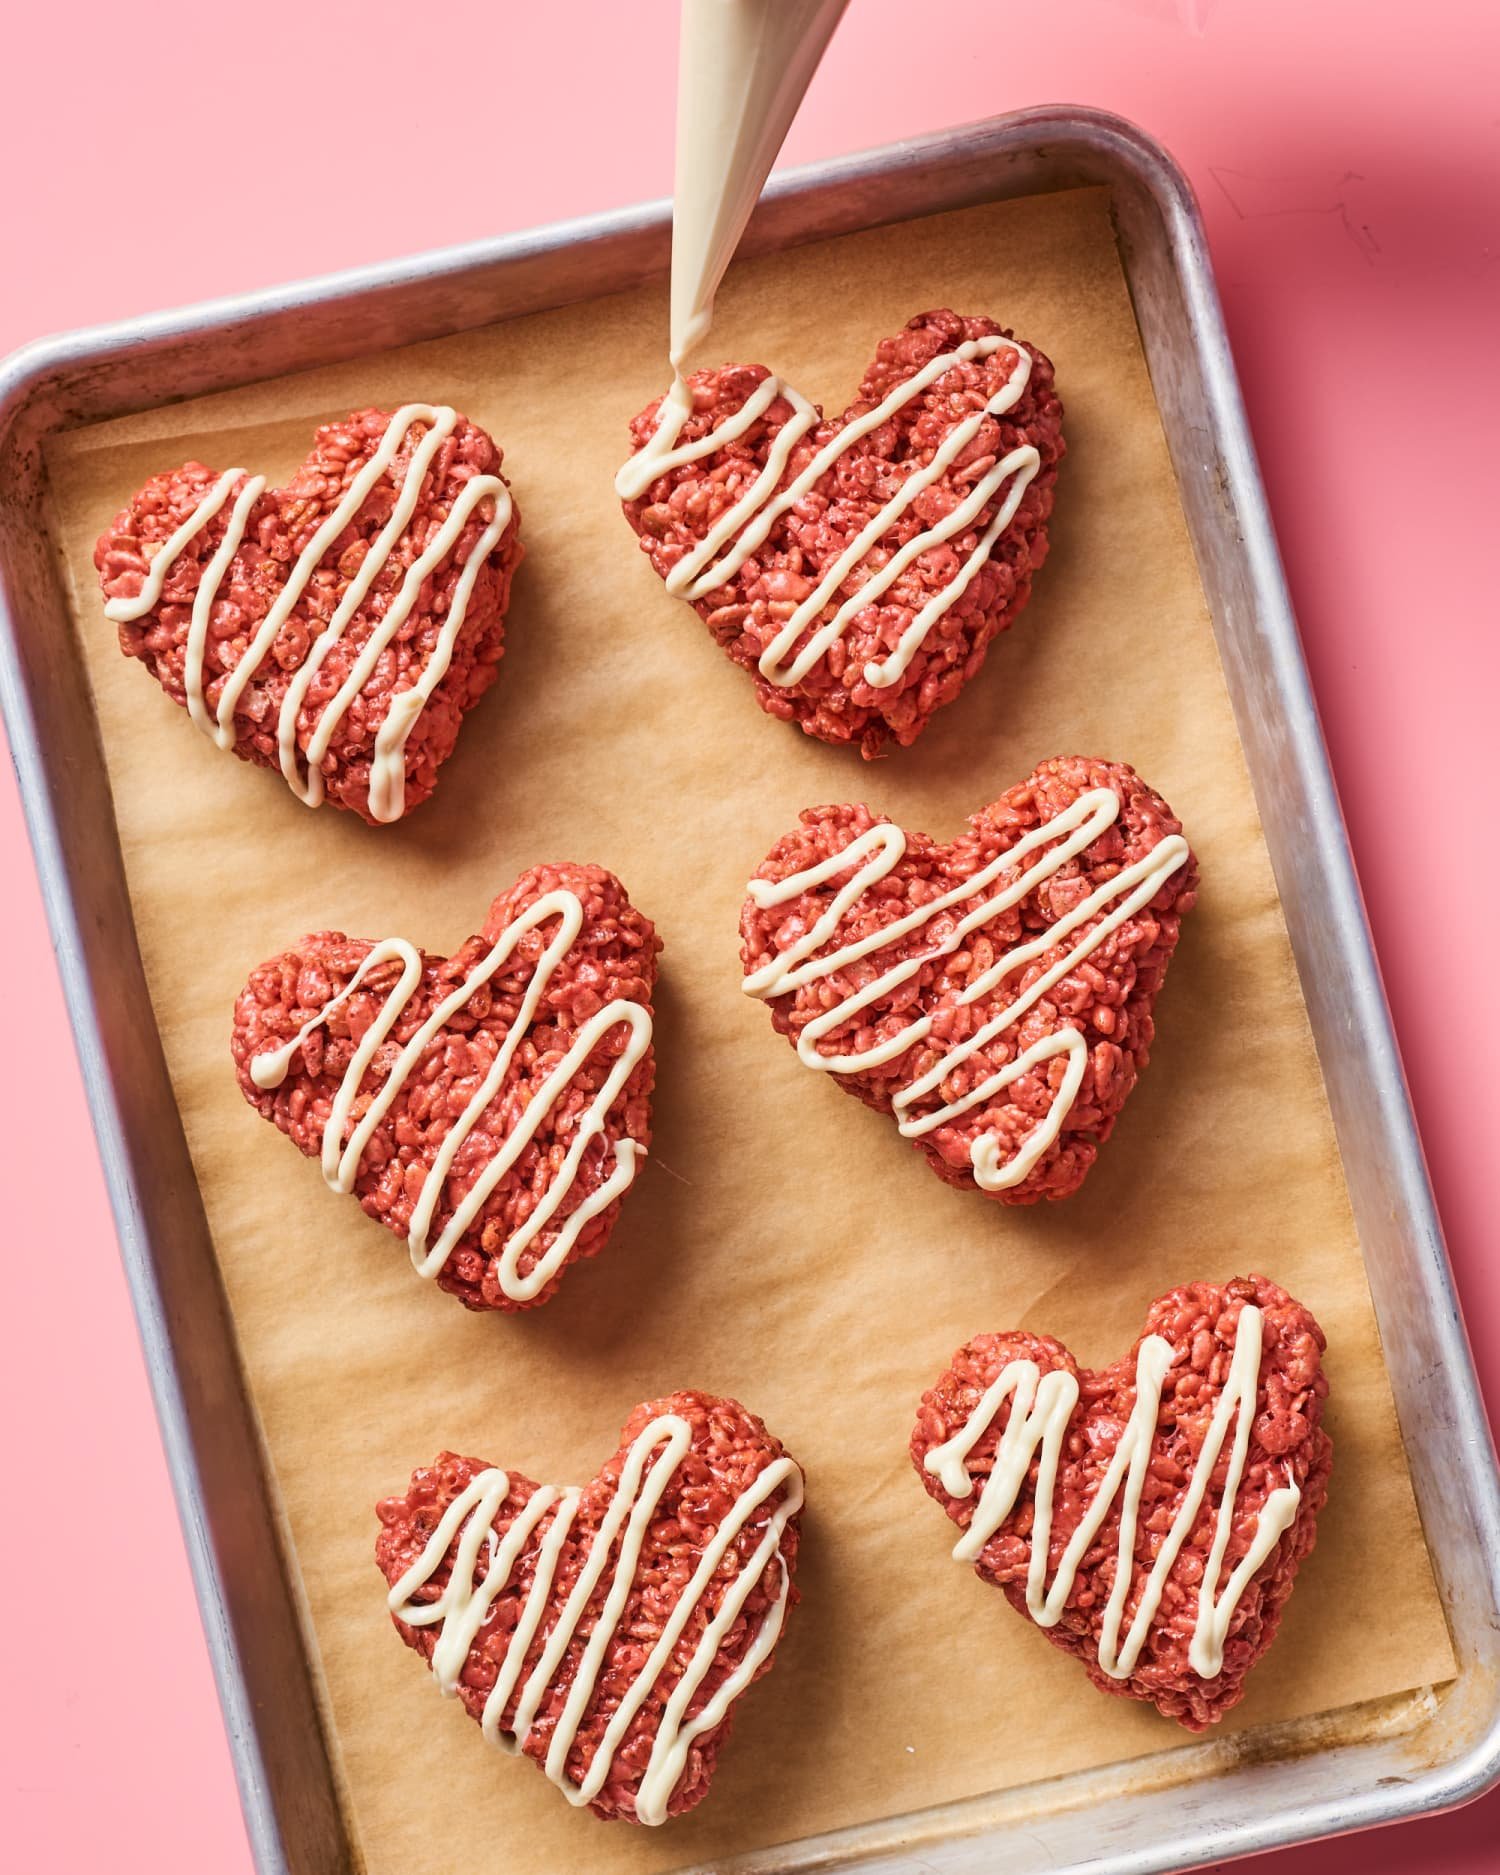 Red Velvet Rice Krispies Treats Are a Valentine's Day Must